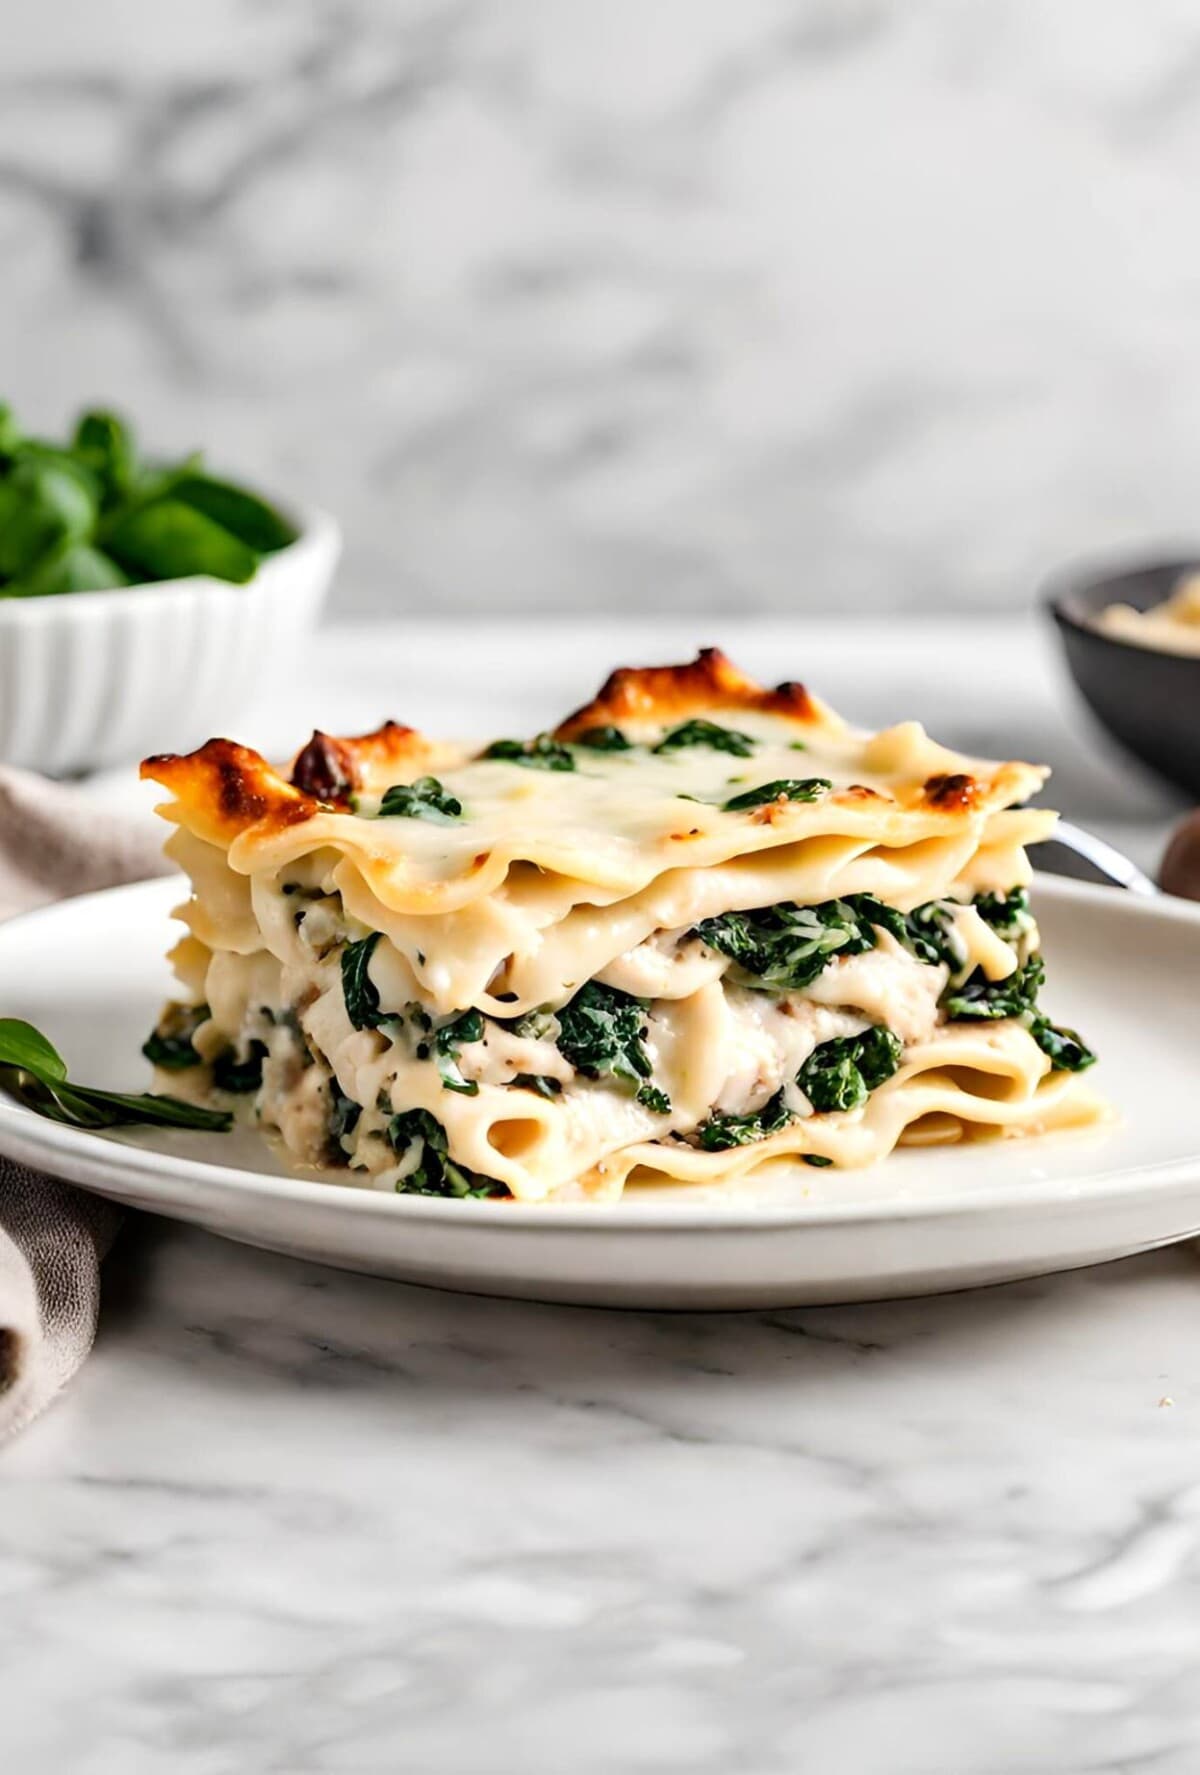 A delicious, cozy recipe for Chicken Lasagna with mushrooms, spinach and rosemary in a creamy Béchamel Sauce. A hearty meal perfect for special gatherings or Sunday supper. Vegetarian-adaptable.